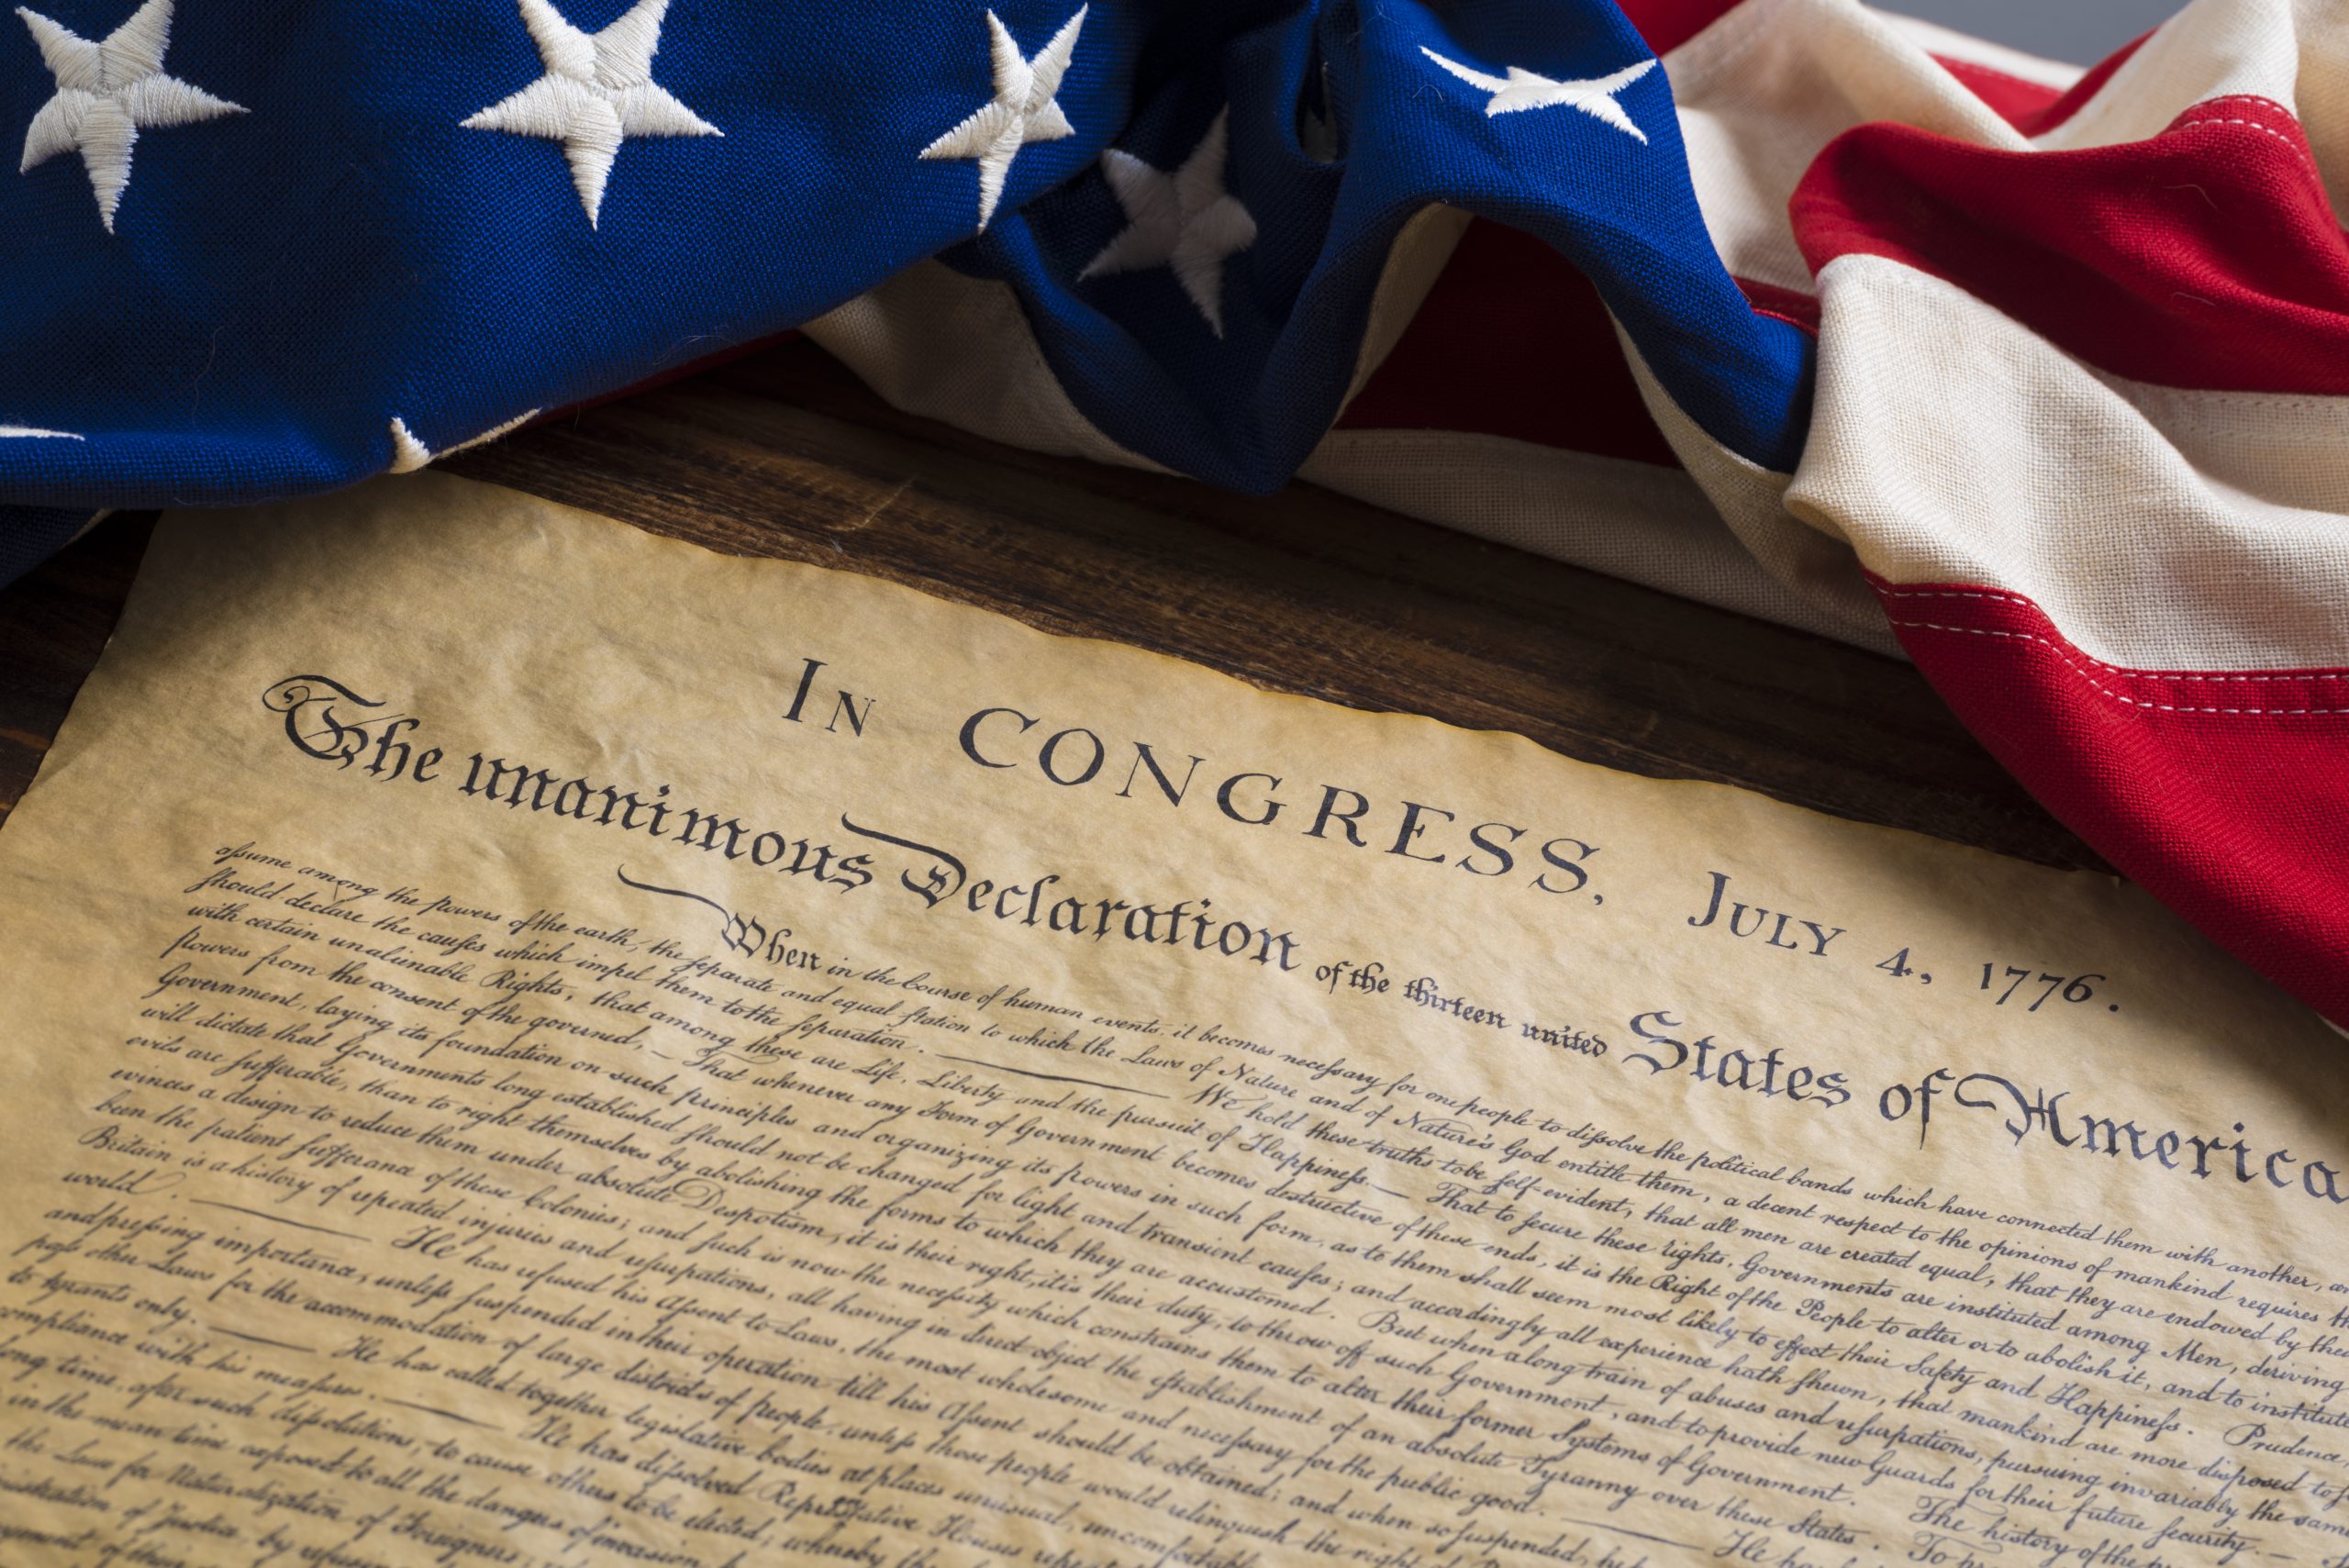 United States Declaration of Independence with vintage flag of the United States.